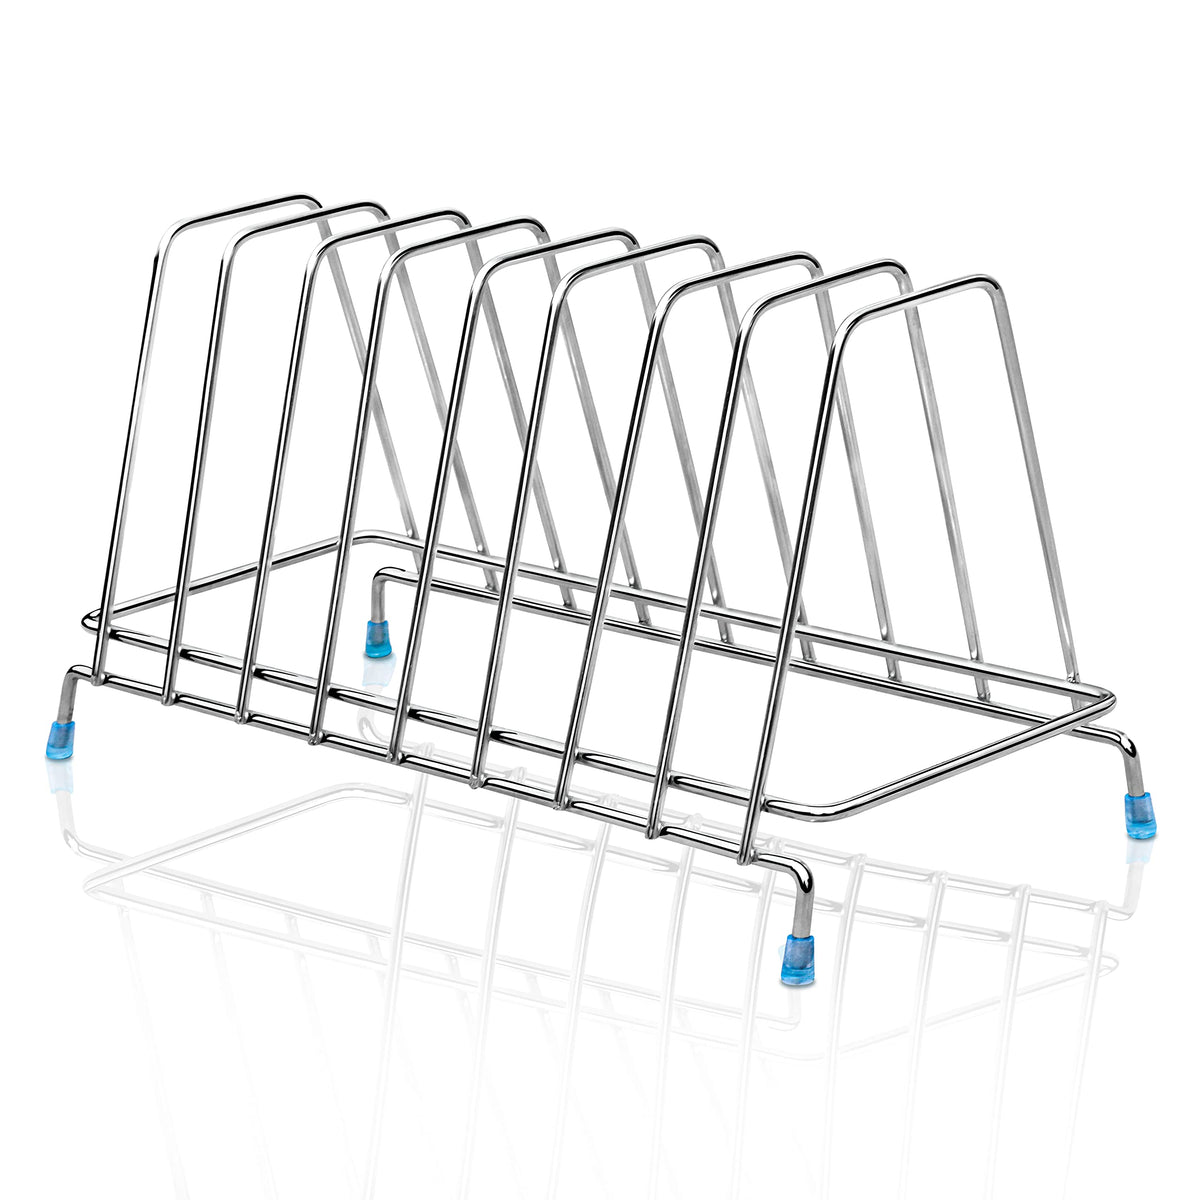 Plantex Premium Stainless Steel Thali Stand/Dish Rack/Plate Stand/Plate Rack for Modular Kitchen/Tandem Box Accessories (Chrome)